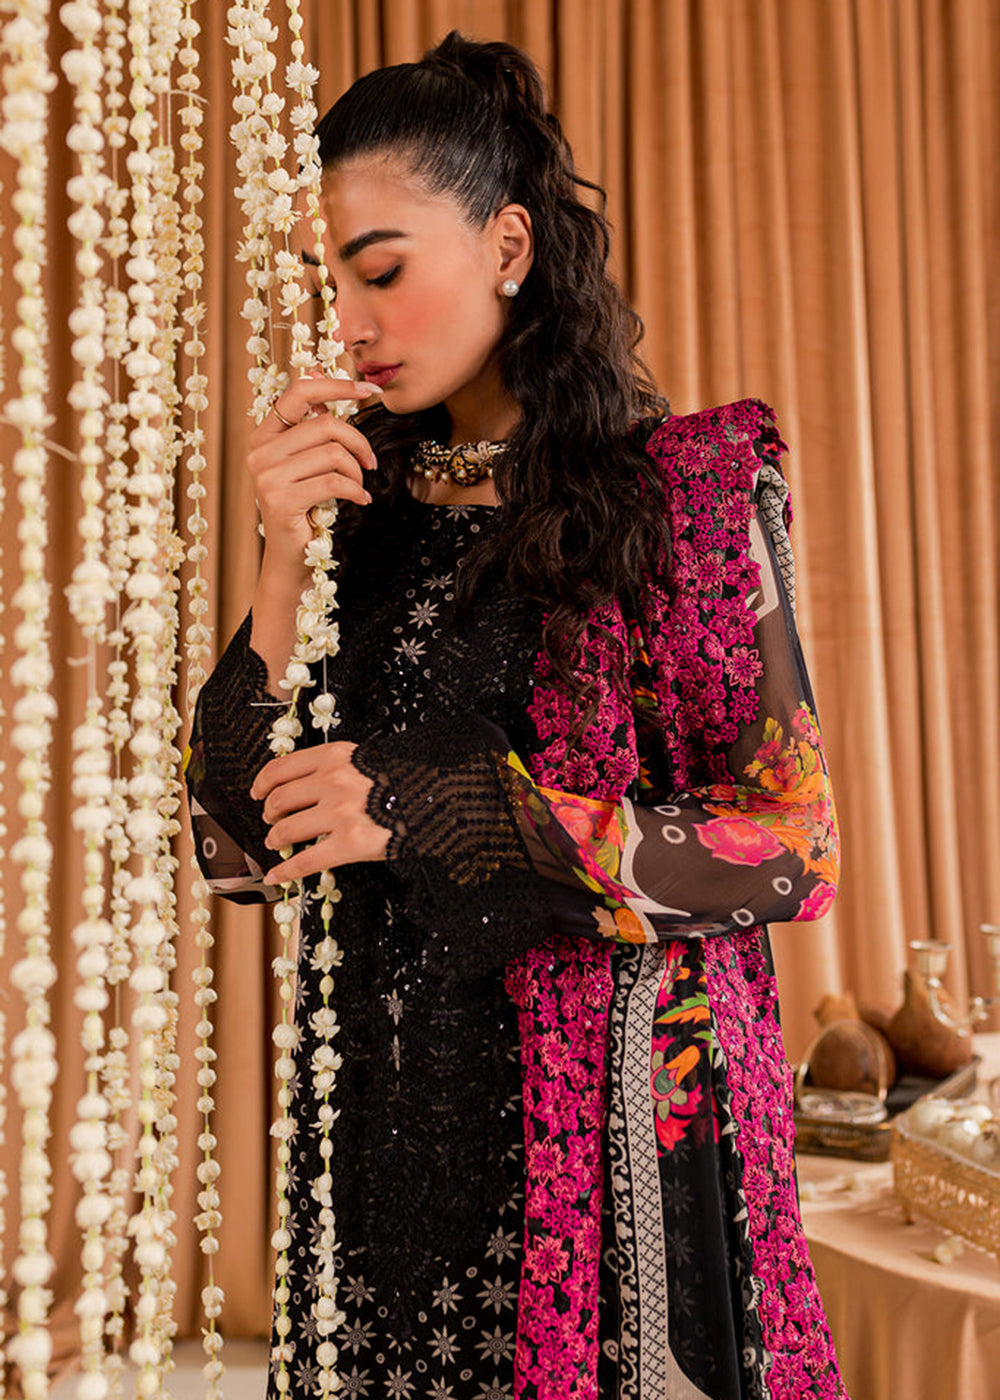 Buy Now Black Chiffon Suit - Vasal Formals ’23 By Charizma | VSL-05 Online in USA, UK, Canada & Worldwide at Empress Clothing.